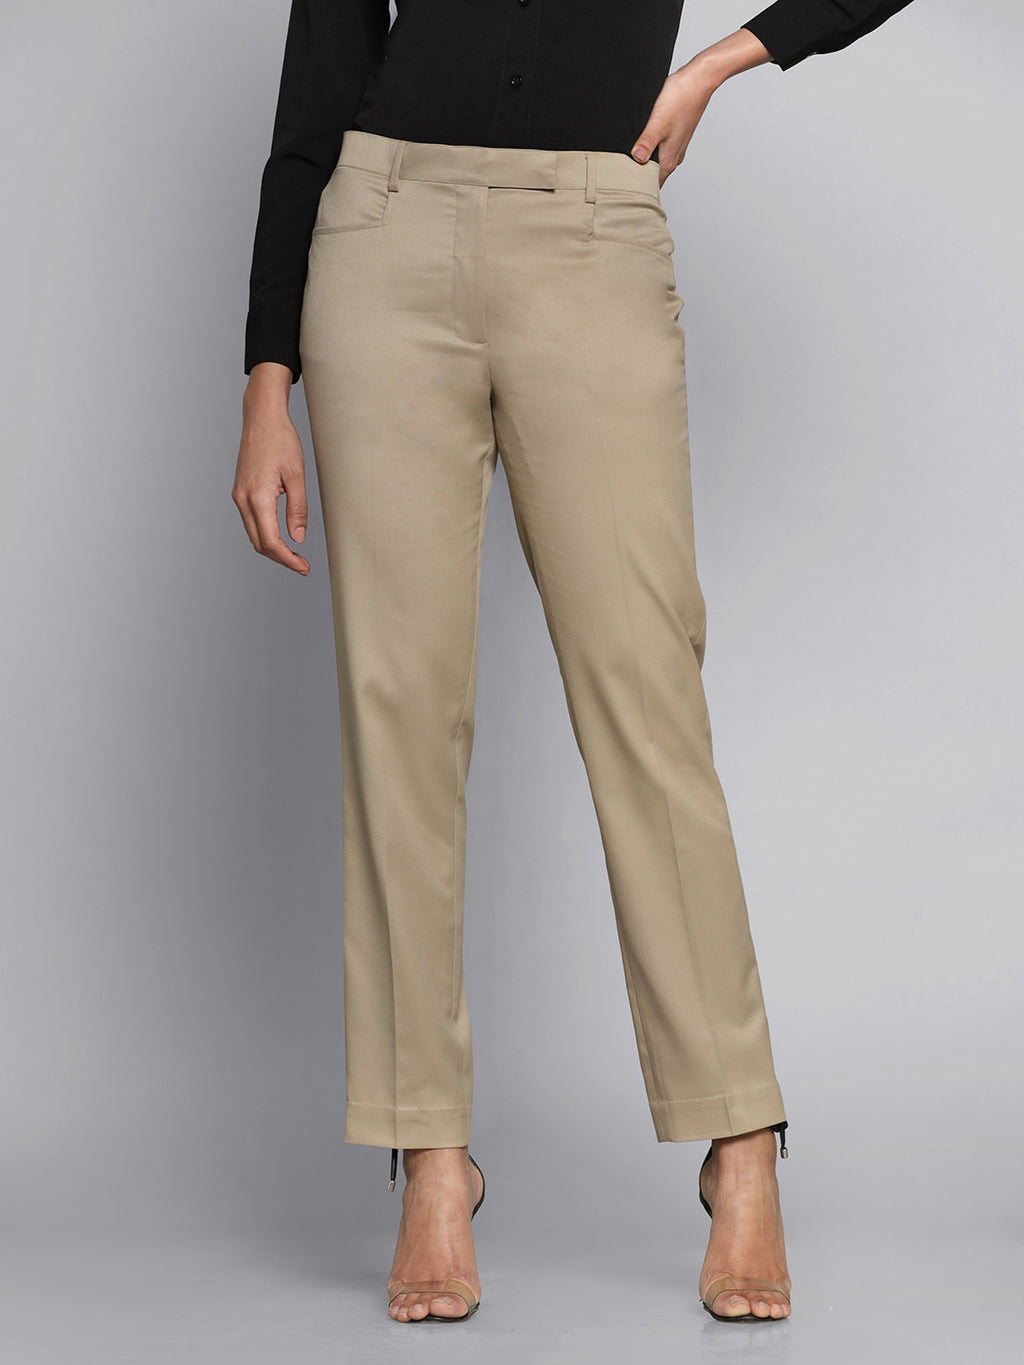 Women's ladies classic Gap beige khakis chinos pants 100% cotton 8 -  clothing & accessories - by owner - apparel sale